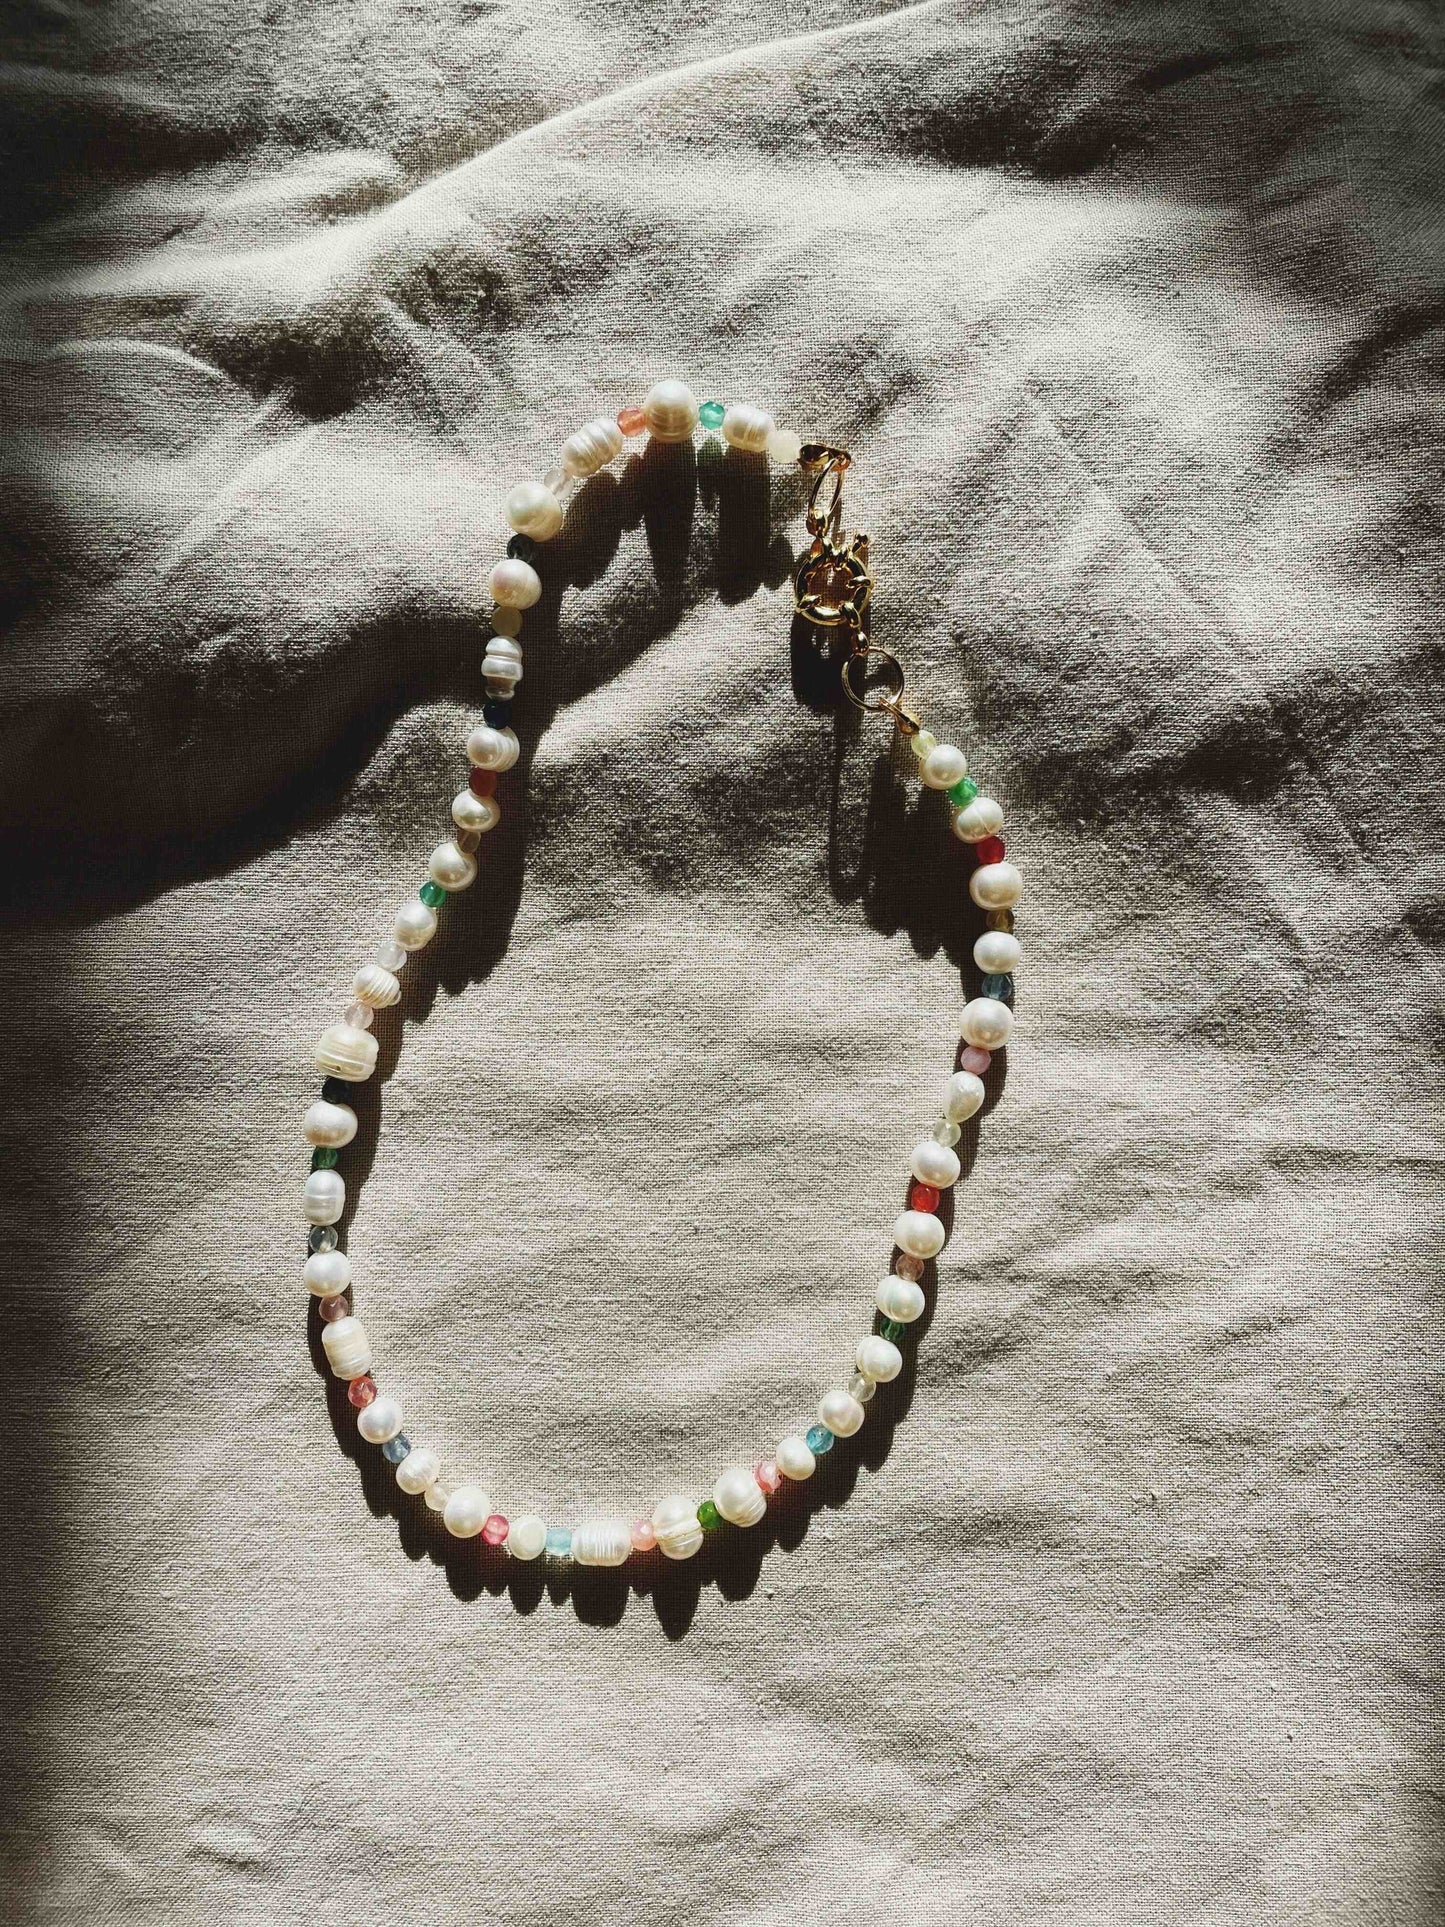 [NMB21013] Pearl x Agate Necklace (Pre-order)